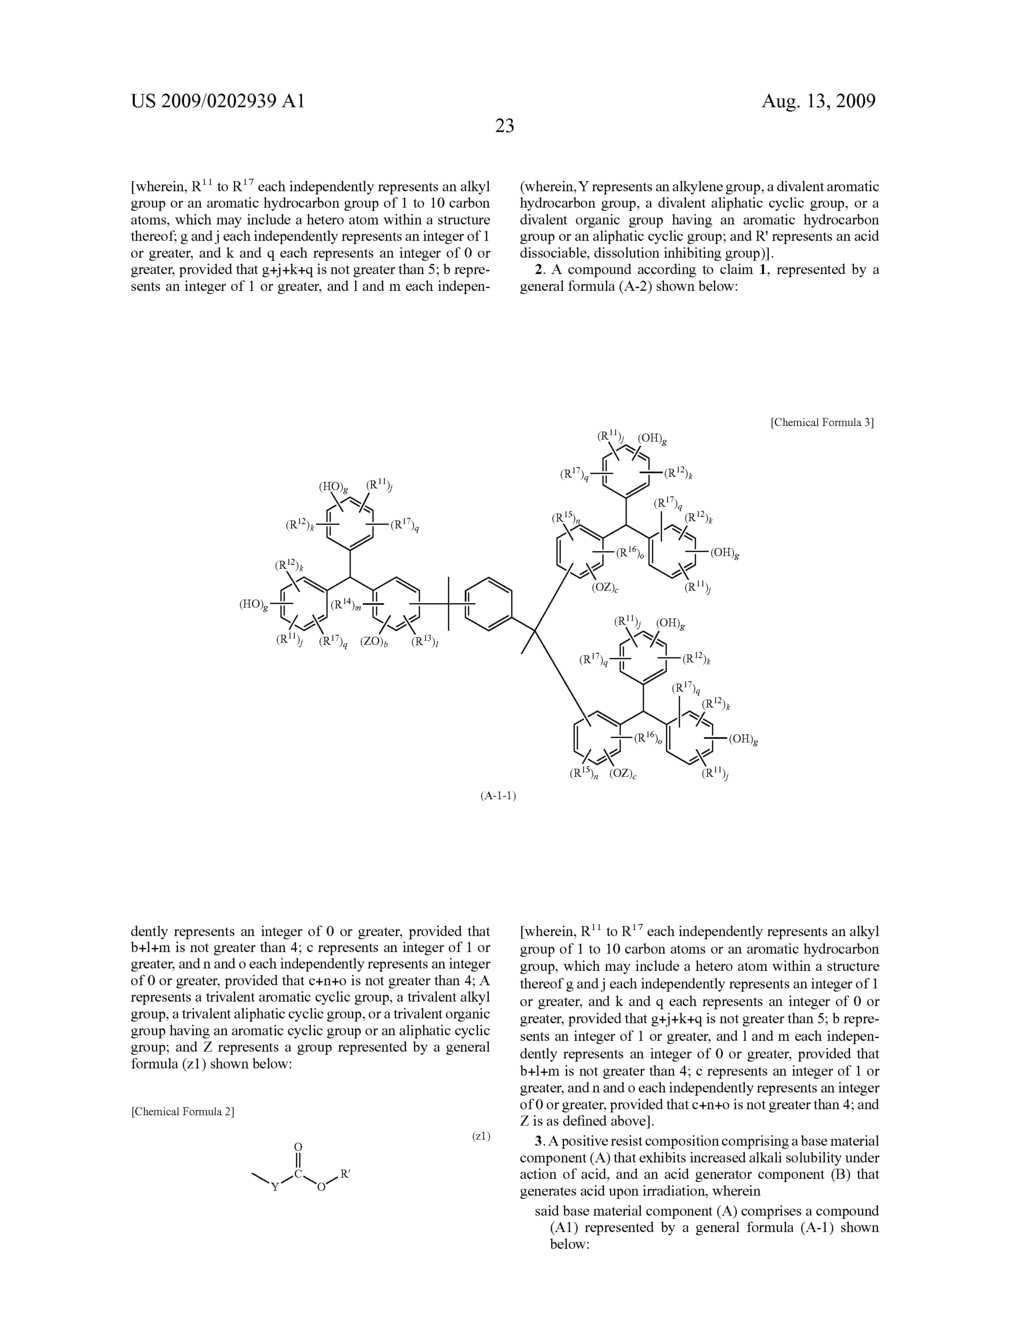 COMPOUND, POSITIVE RESIST COMPOSITION AND METHOD FOR FORMING RESIST PATTERN - diagram, schematic, and image 24